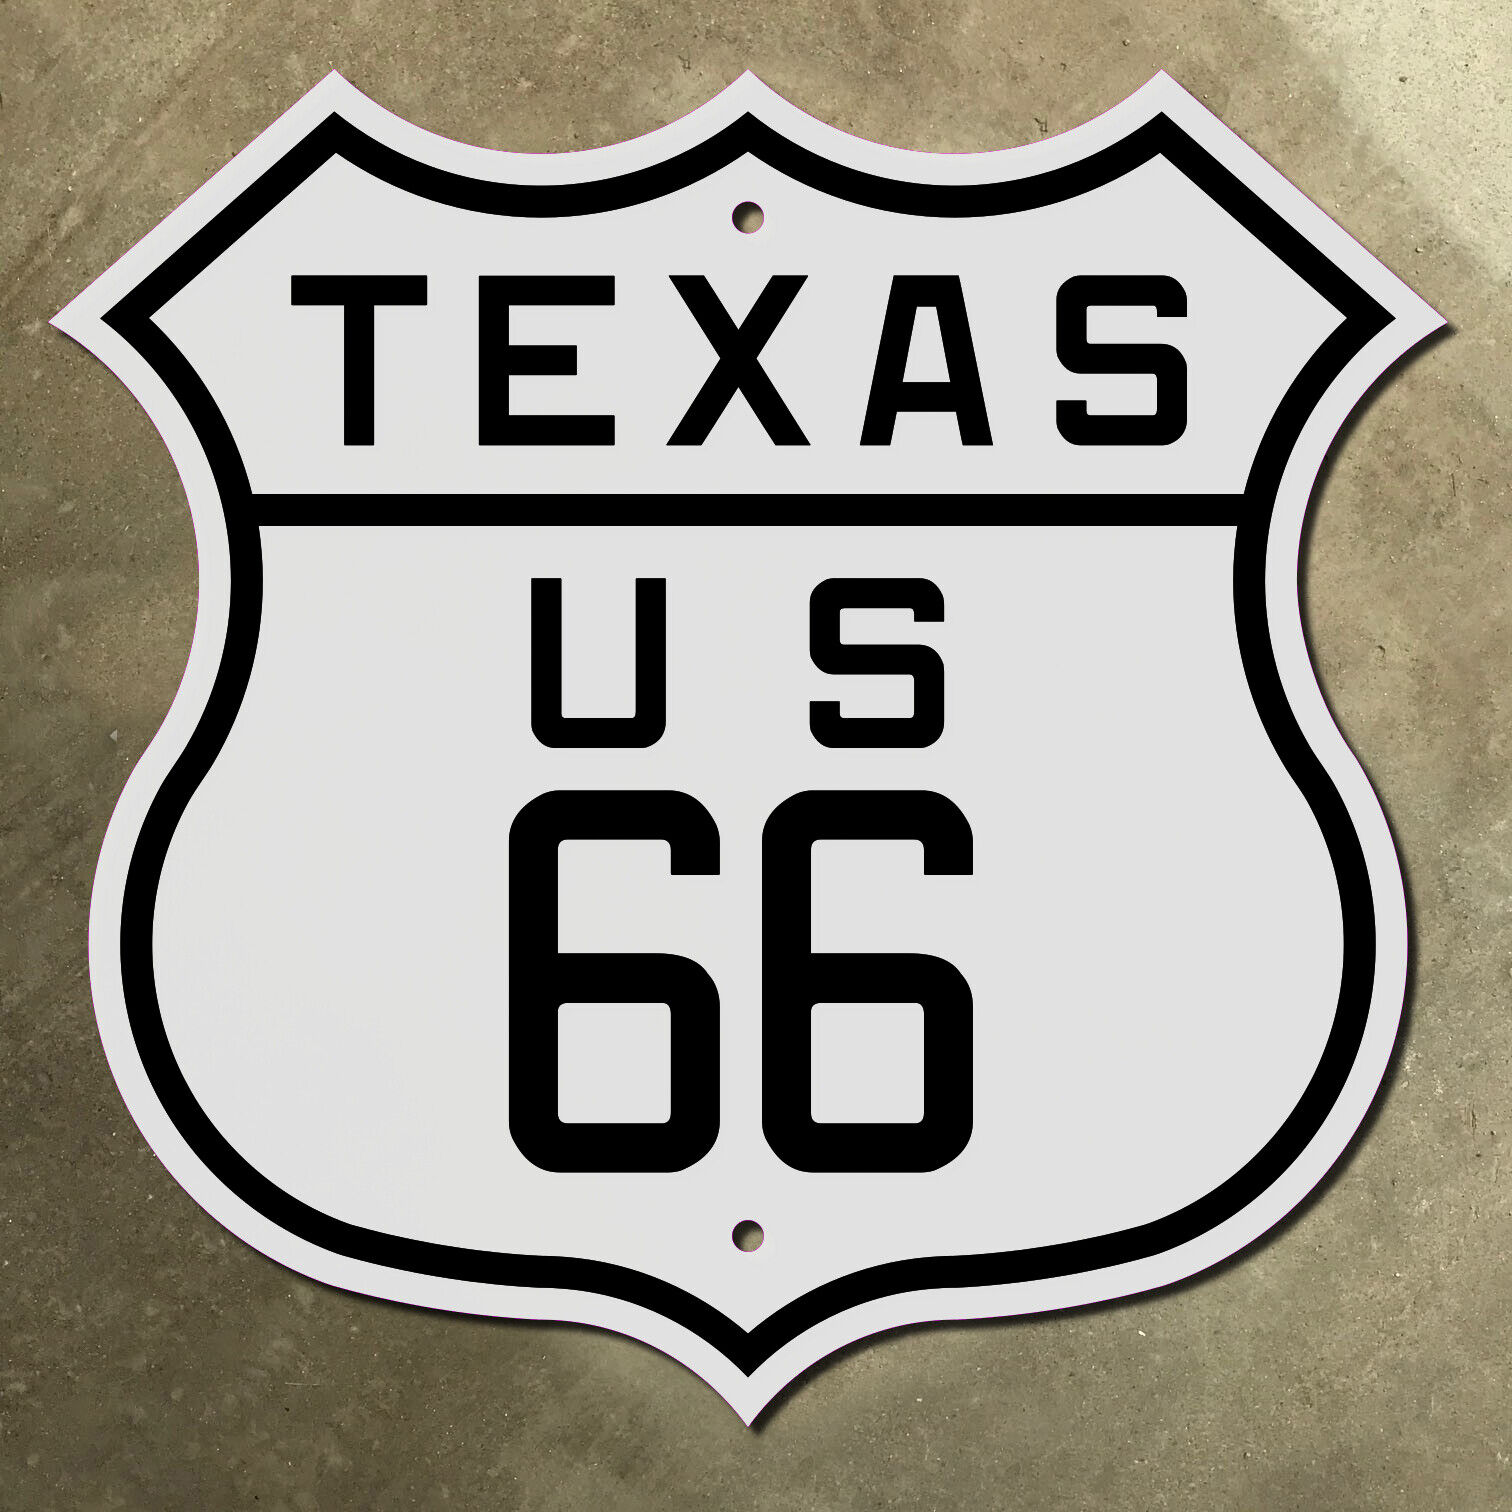 Texas US route 66 Amarillo Glenrio Shamrock highway 1926 sign mother road 12x12